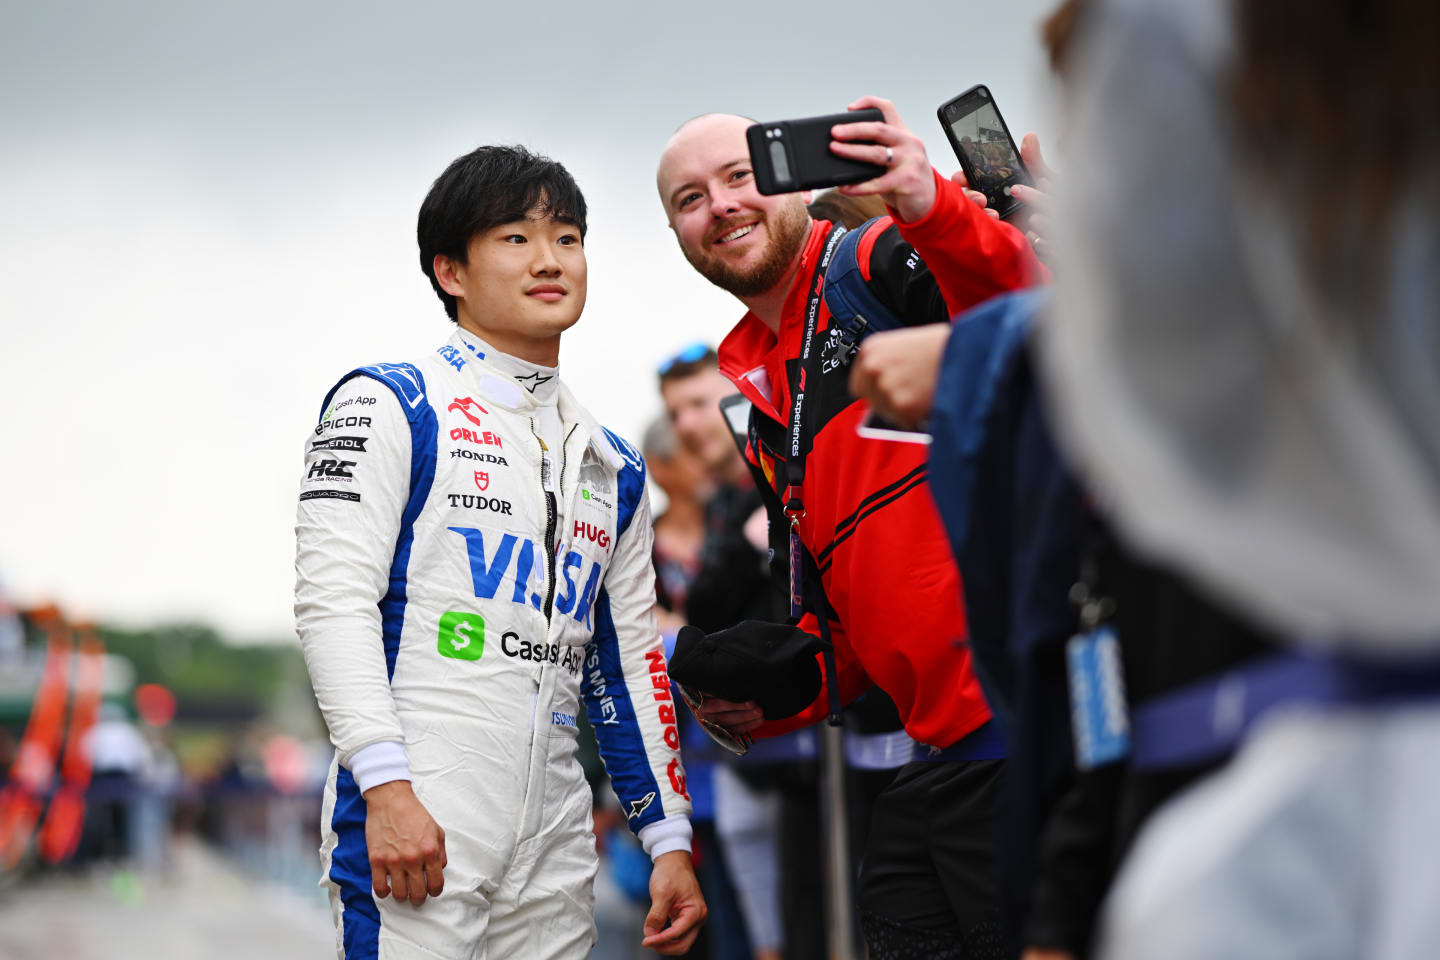 IMOLA, ITALY - MAY 16: Yuki Tsunoda of Japan and Visa Cash App RB greets fans in the Paddock during